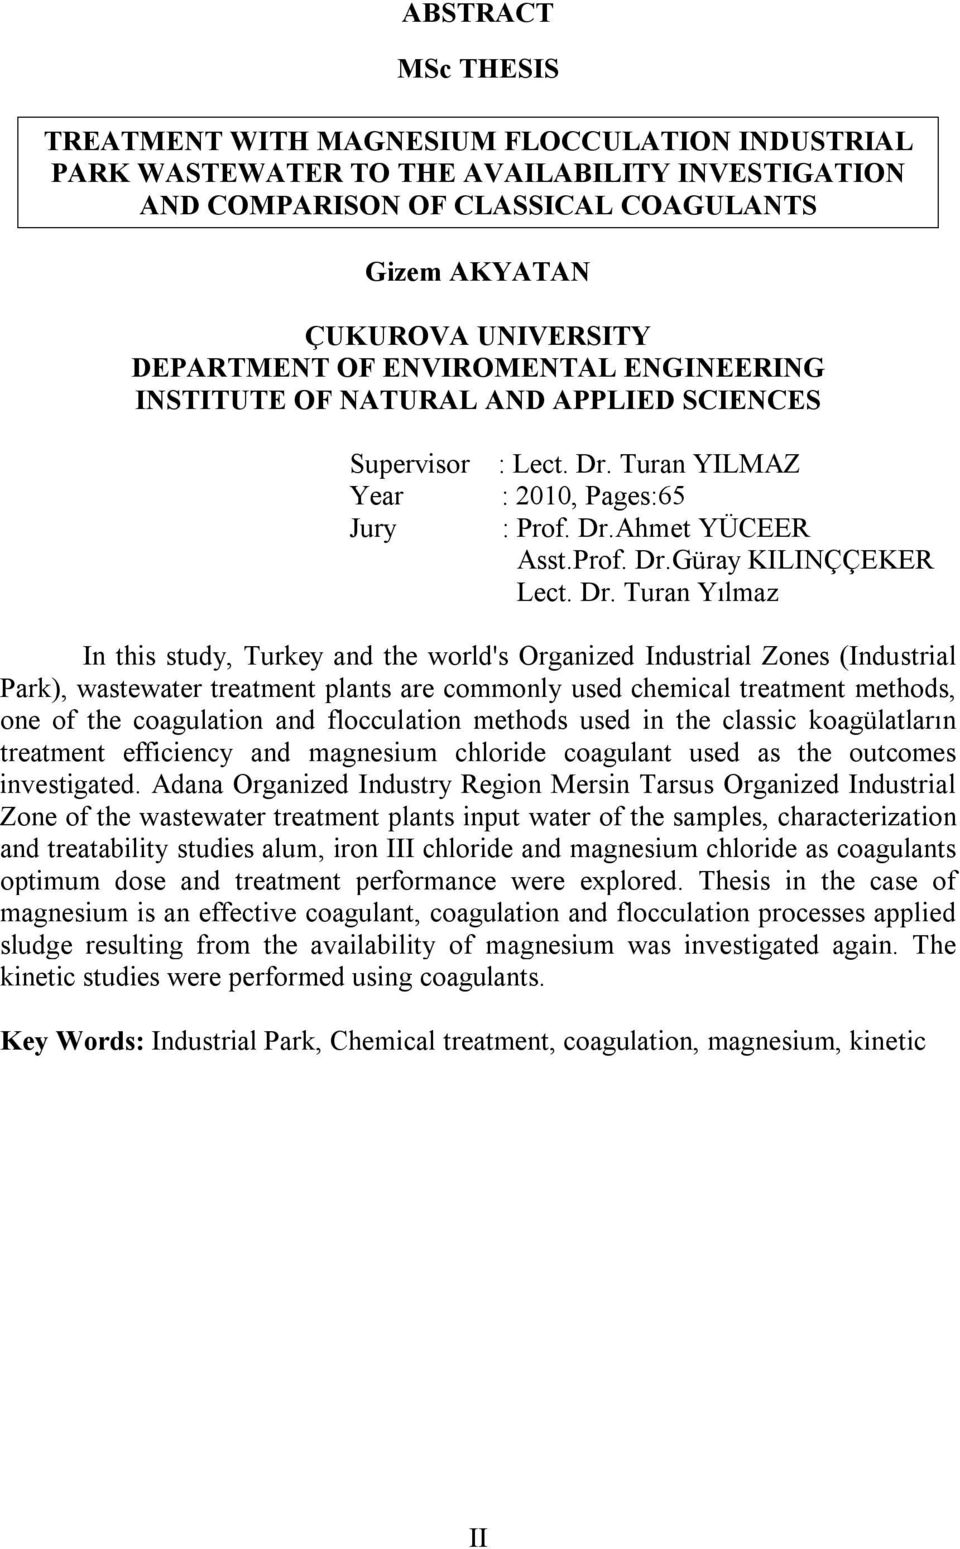 Dr. Turan Yılmaz In this study, Turkey and the world's Organized Industrial Zones (Industrial Park), wastewater treatment plants are commonly used chemical treatment methods, one of the coagulation